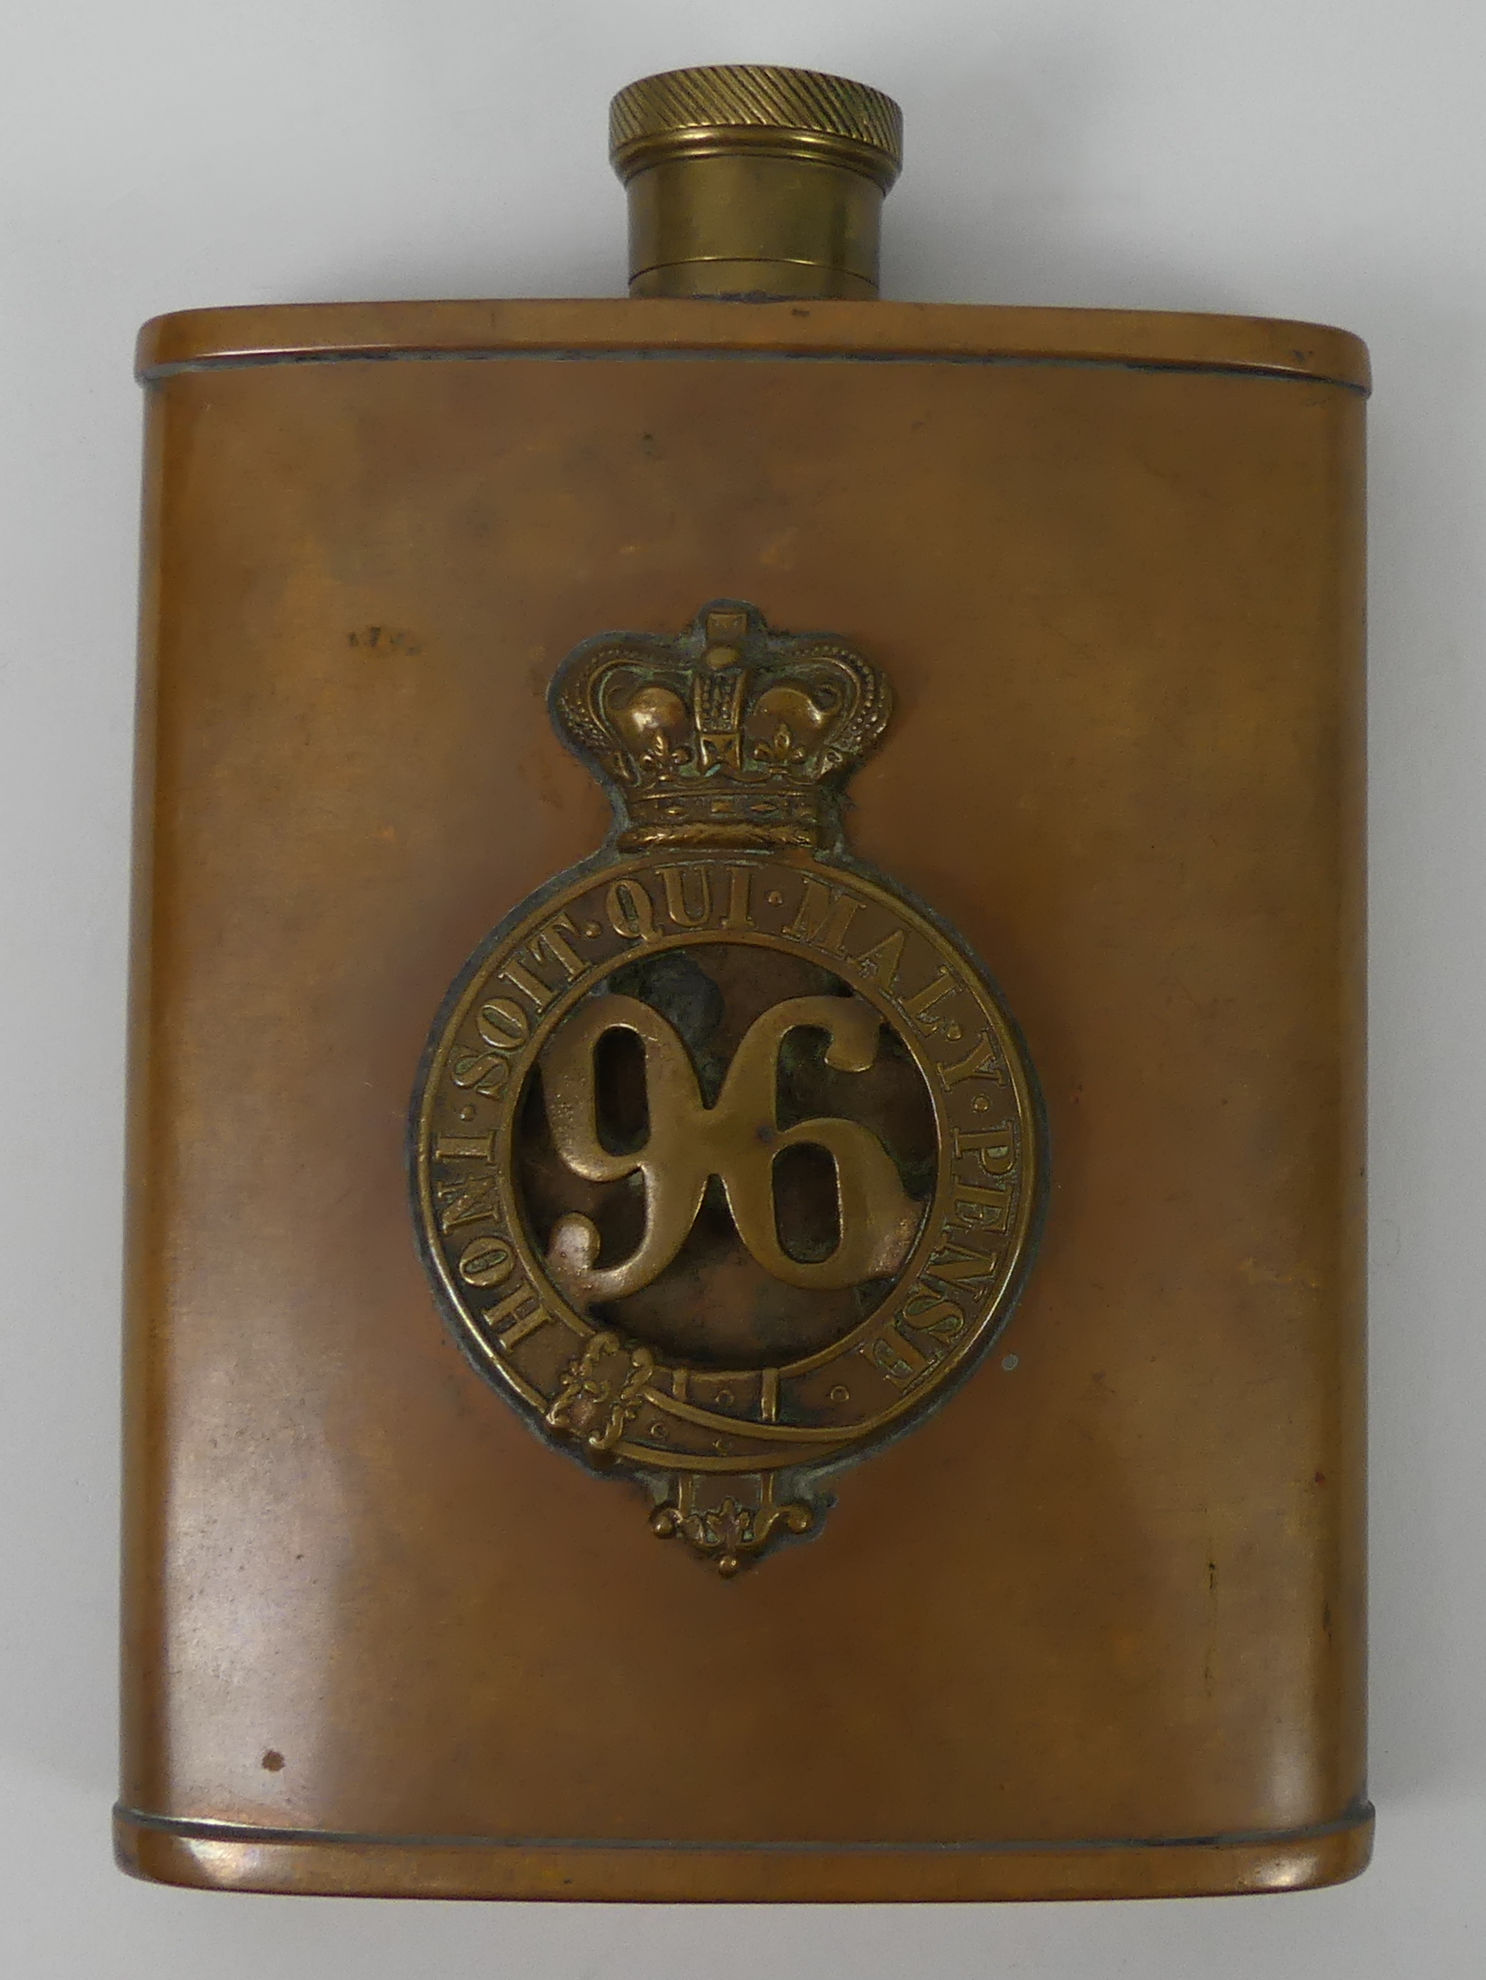 A WWII hip flask with badge to the front 96 regiment. 13 x 10 cm. - Image 3 of 3